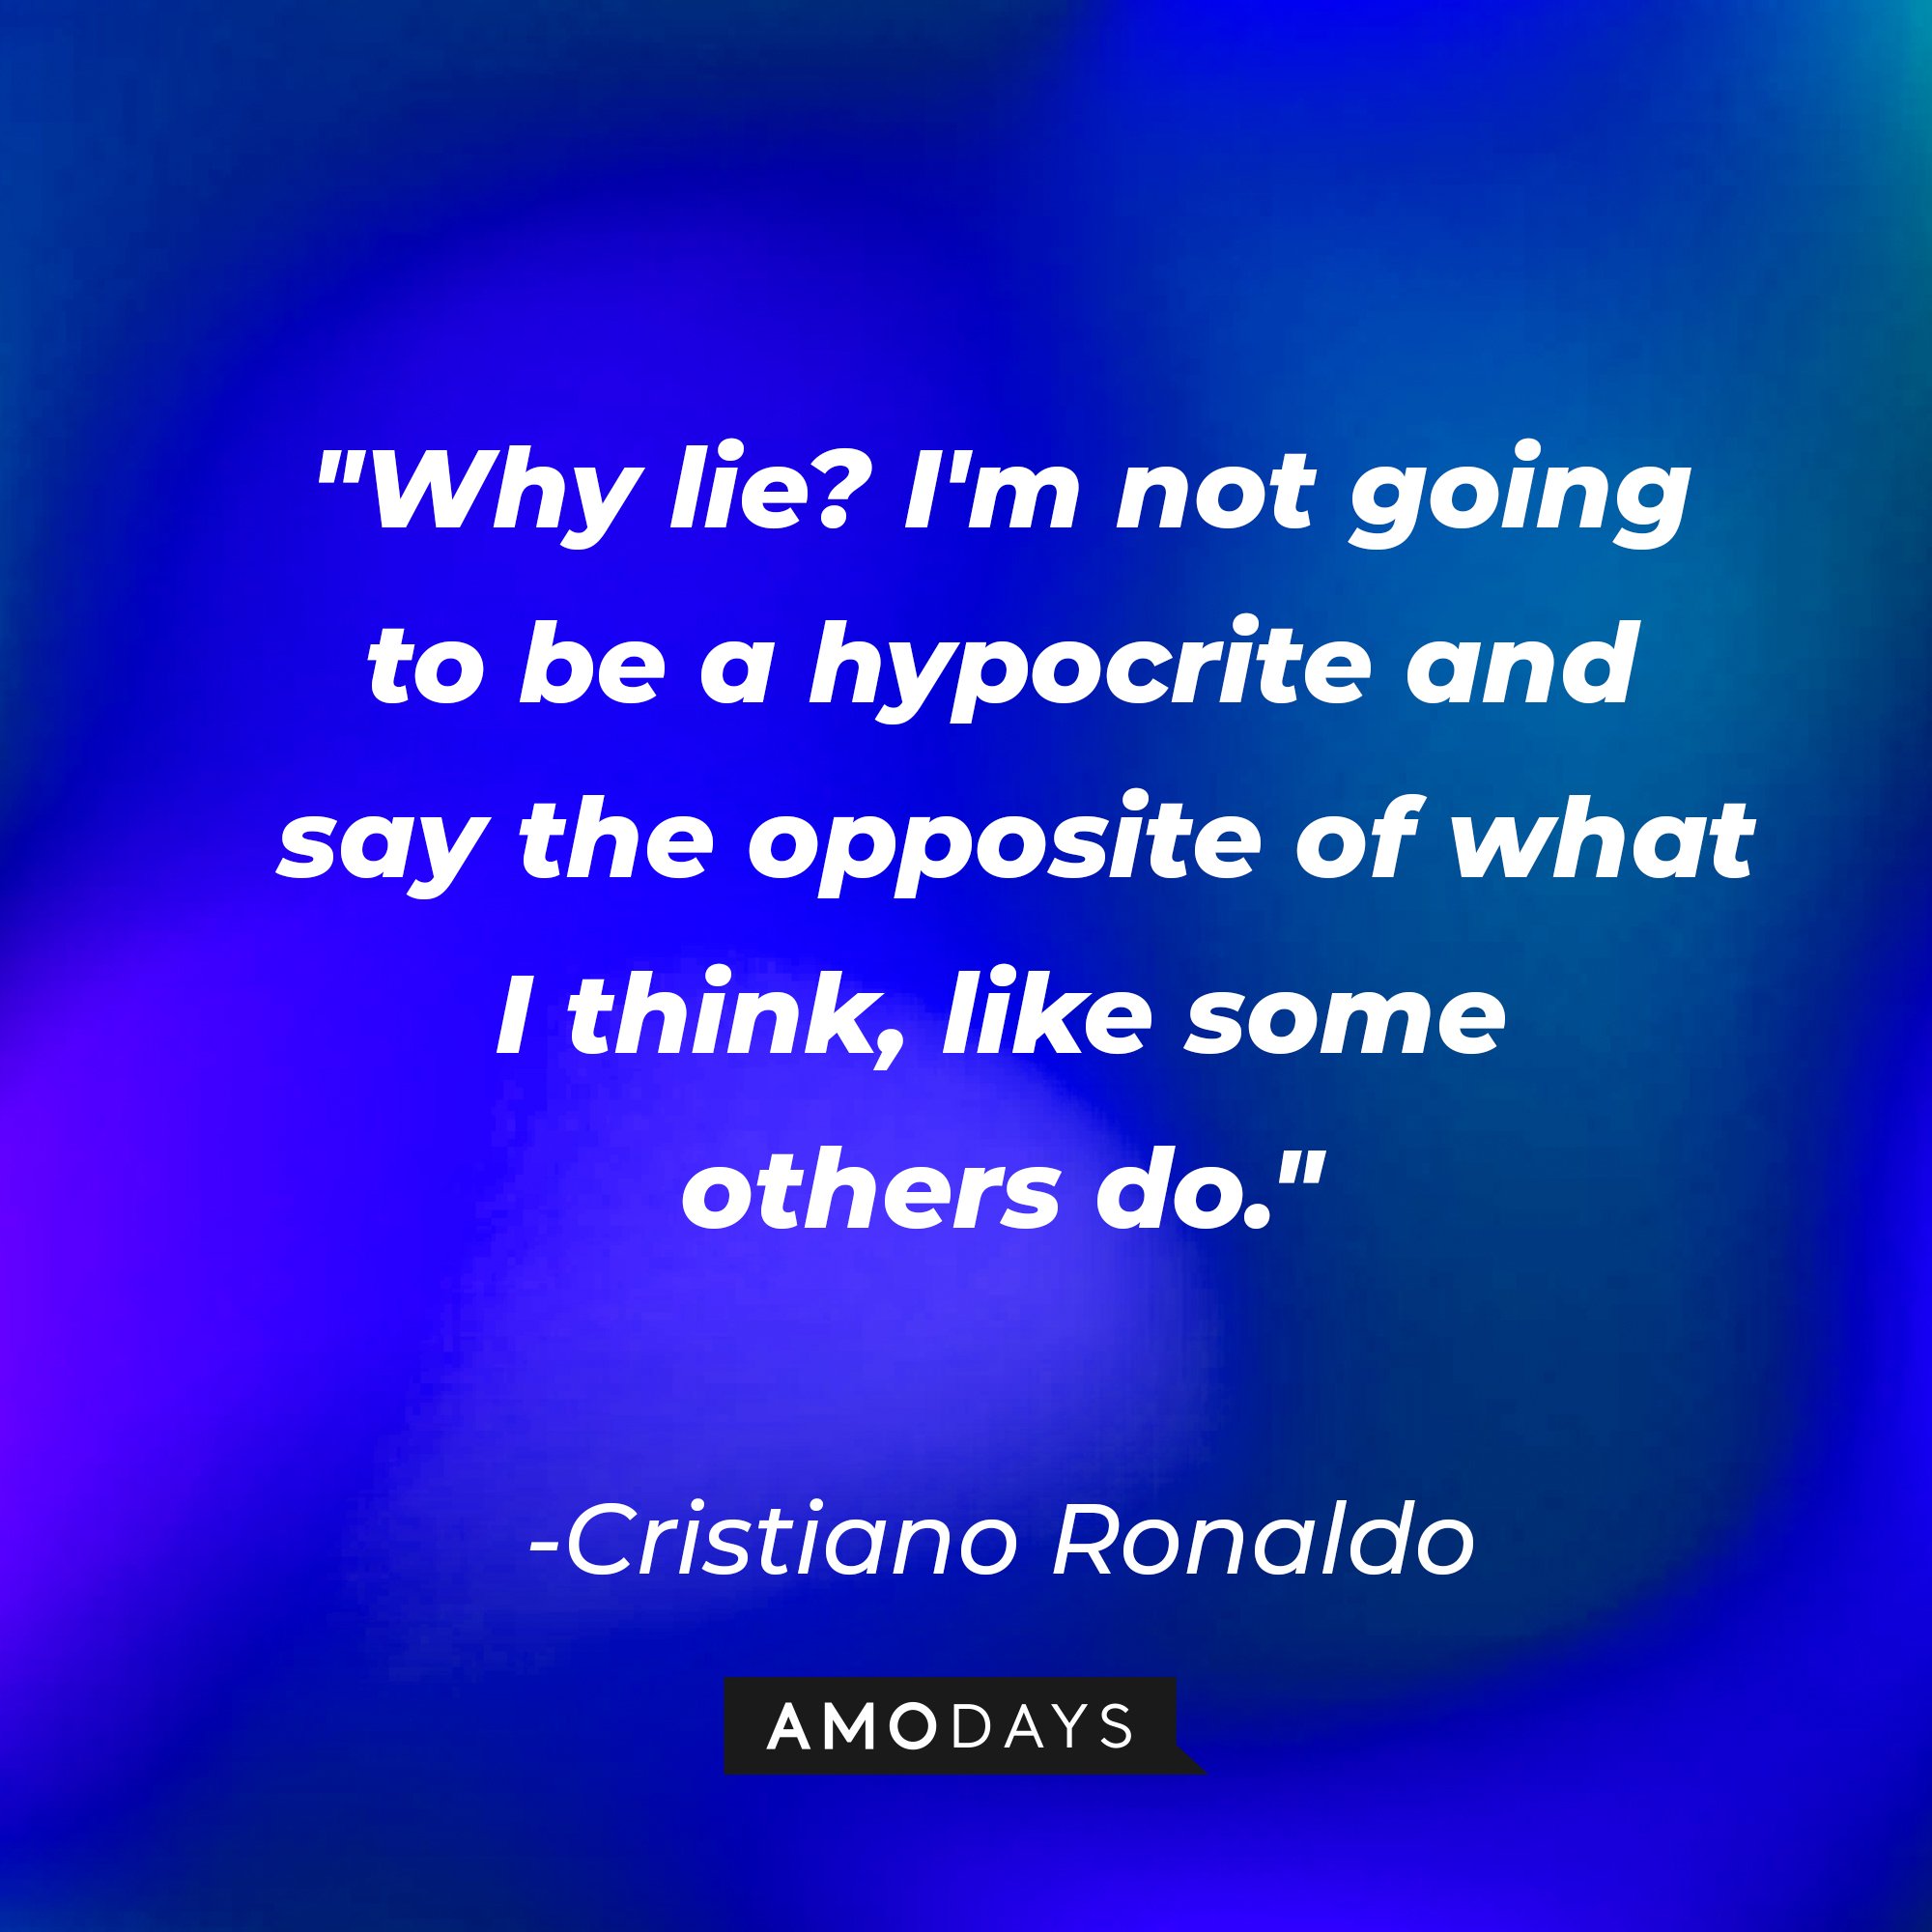 Cristiano Ronaldo's quote:\\\\\\\\\\\\\\\\u00a0"Why lie? I'm not going to be a hypocrite and say the opposite of what I think, like some others do.\\\\\\\\\\\\\\\\u00a0| Image: AmoDays